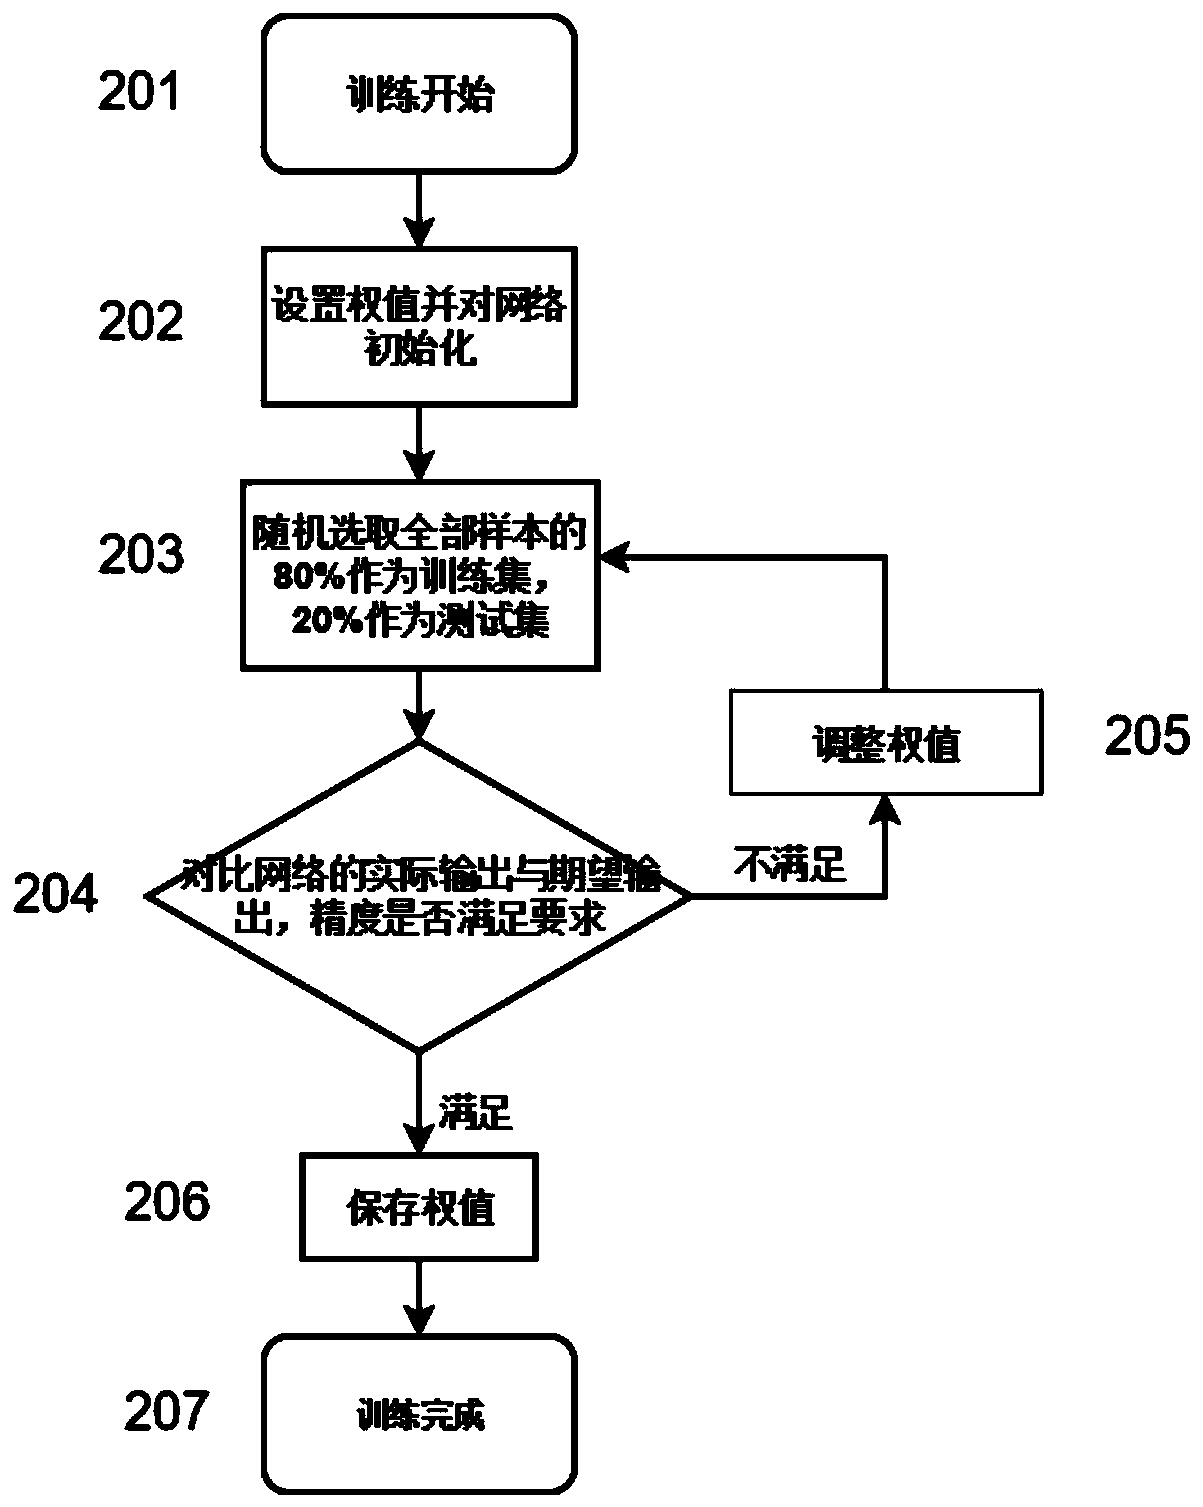 Nondestructive visual inspection grading method for internal quality of preserved eggs